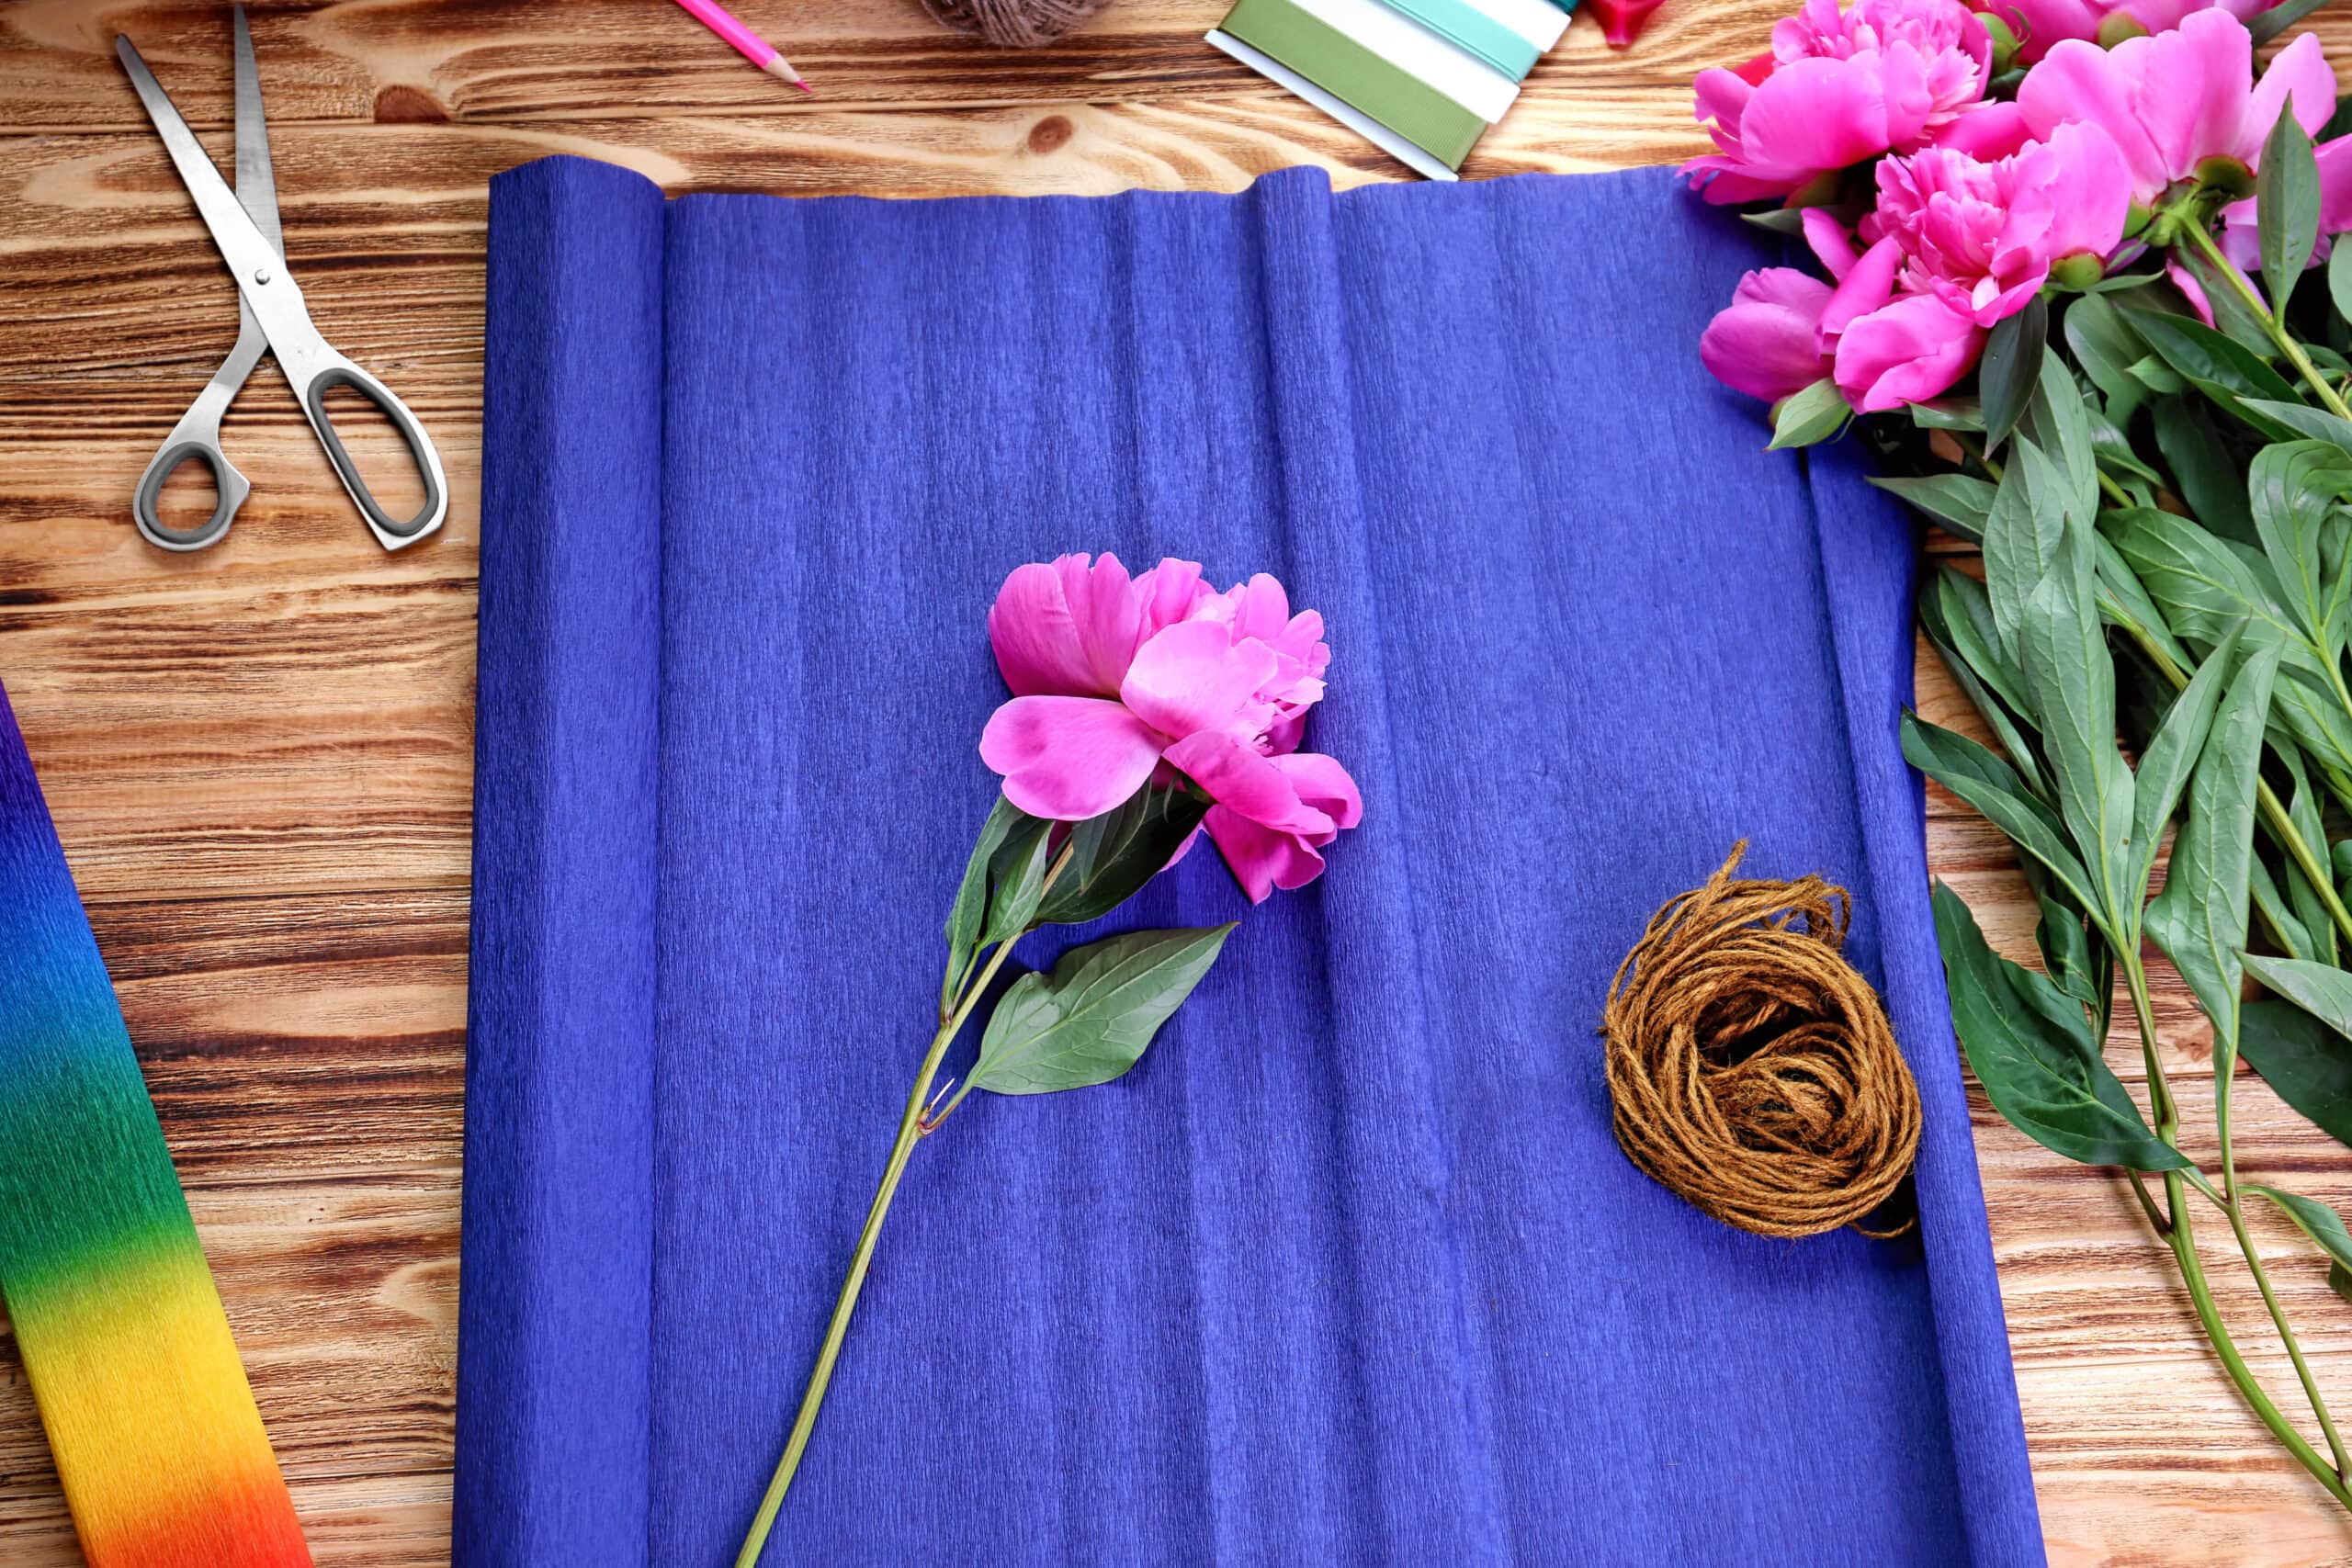 Purple crepe paper peonies sit on a spread-out roll of blue crepe paper. Also in the image are a pair of scissors, a bunch of twine, and a roll of rainbow crepe paper. The image is high saturated, so the colors are both and bright.